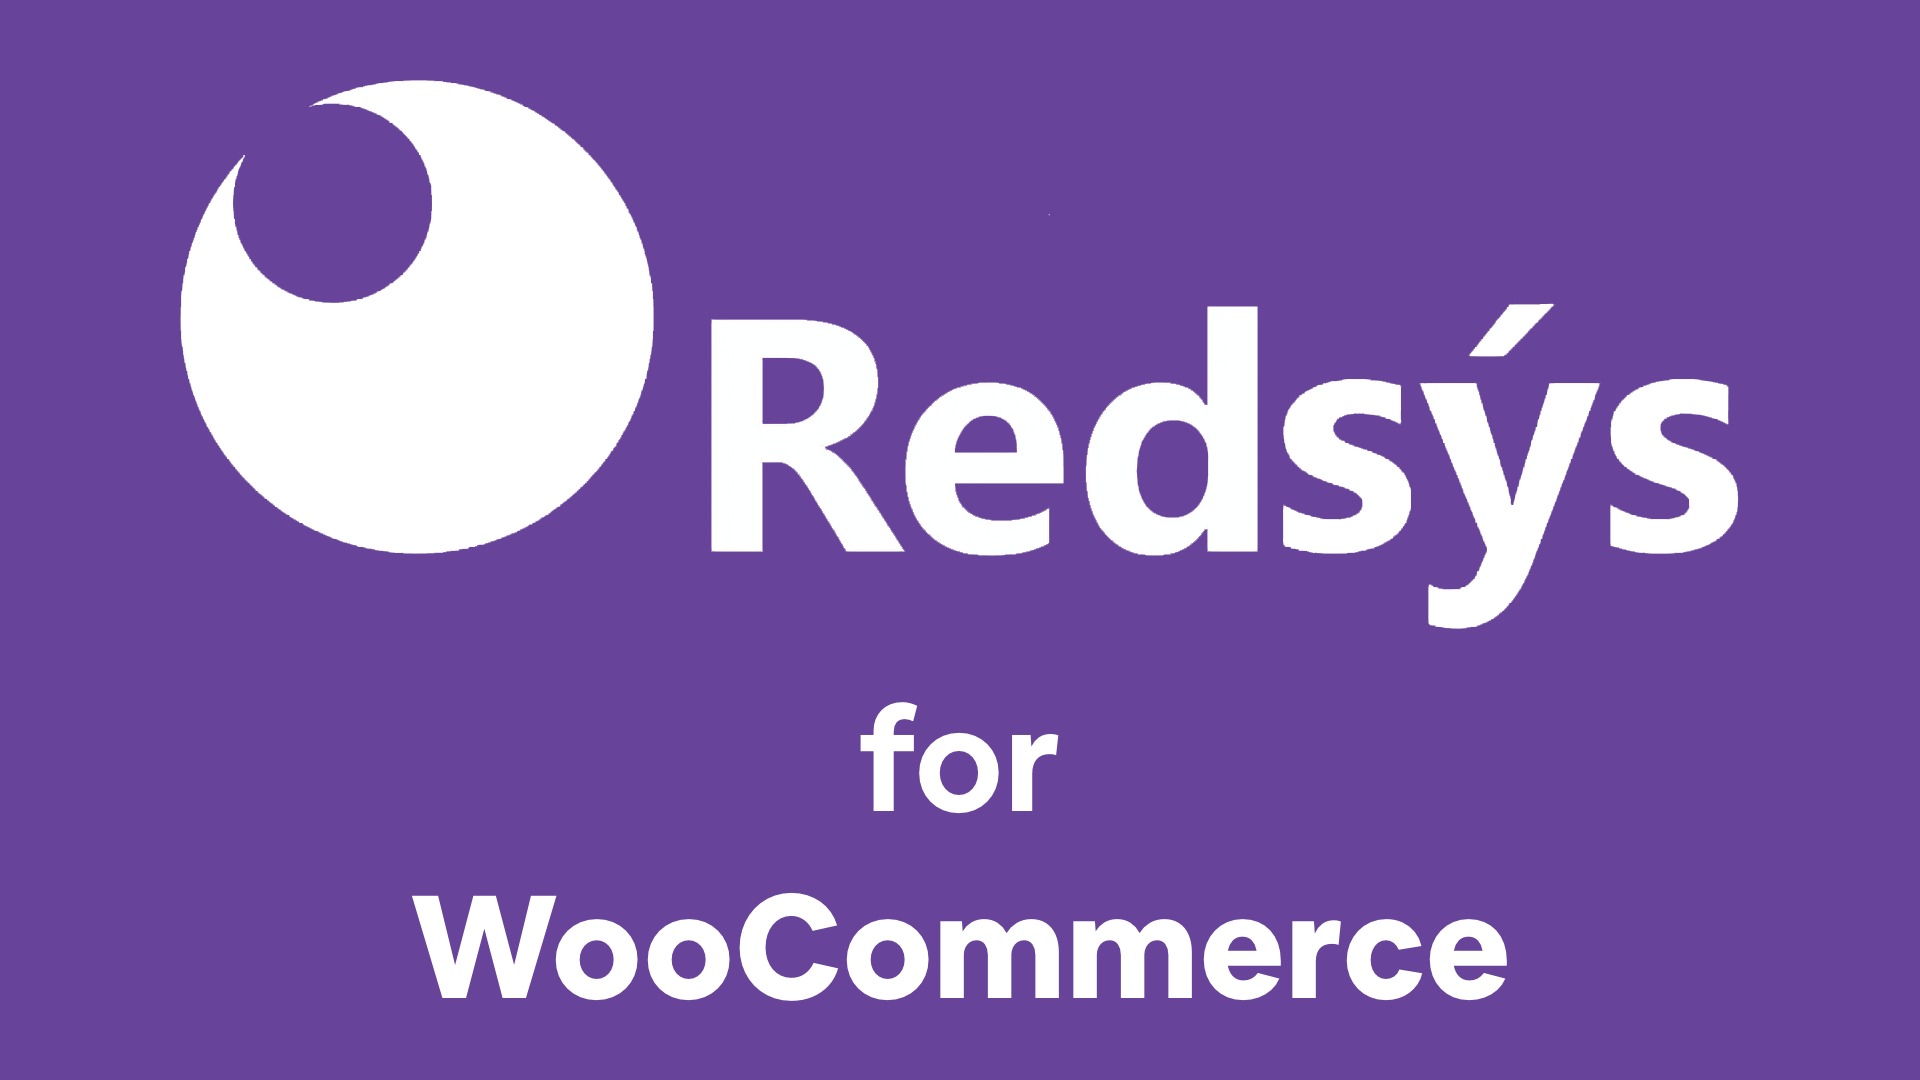 WooCommerce RedSys Payment Gateway